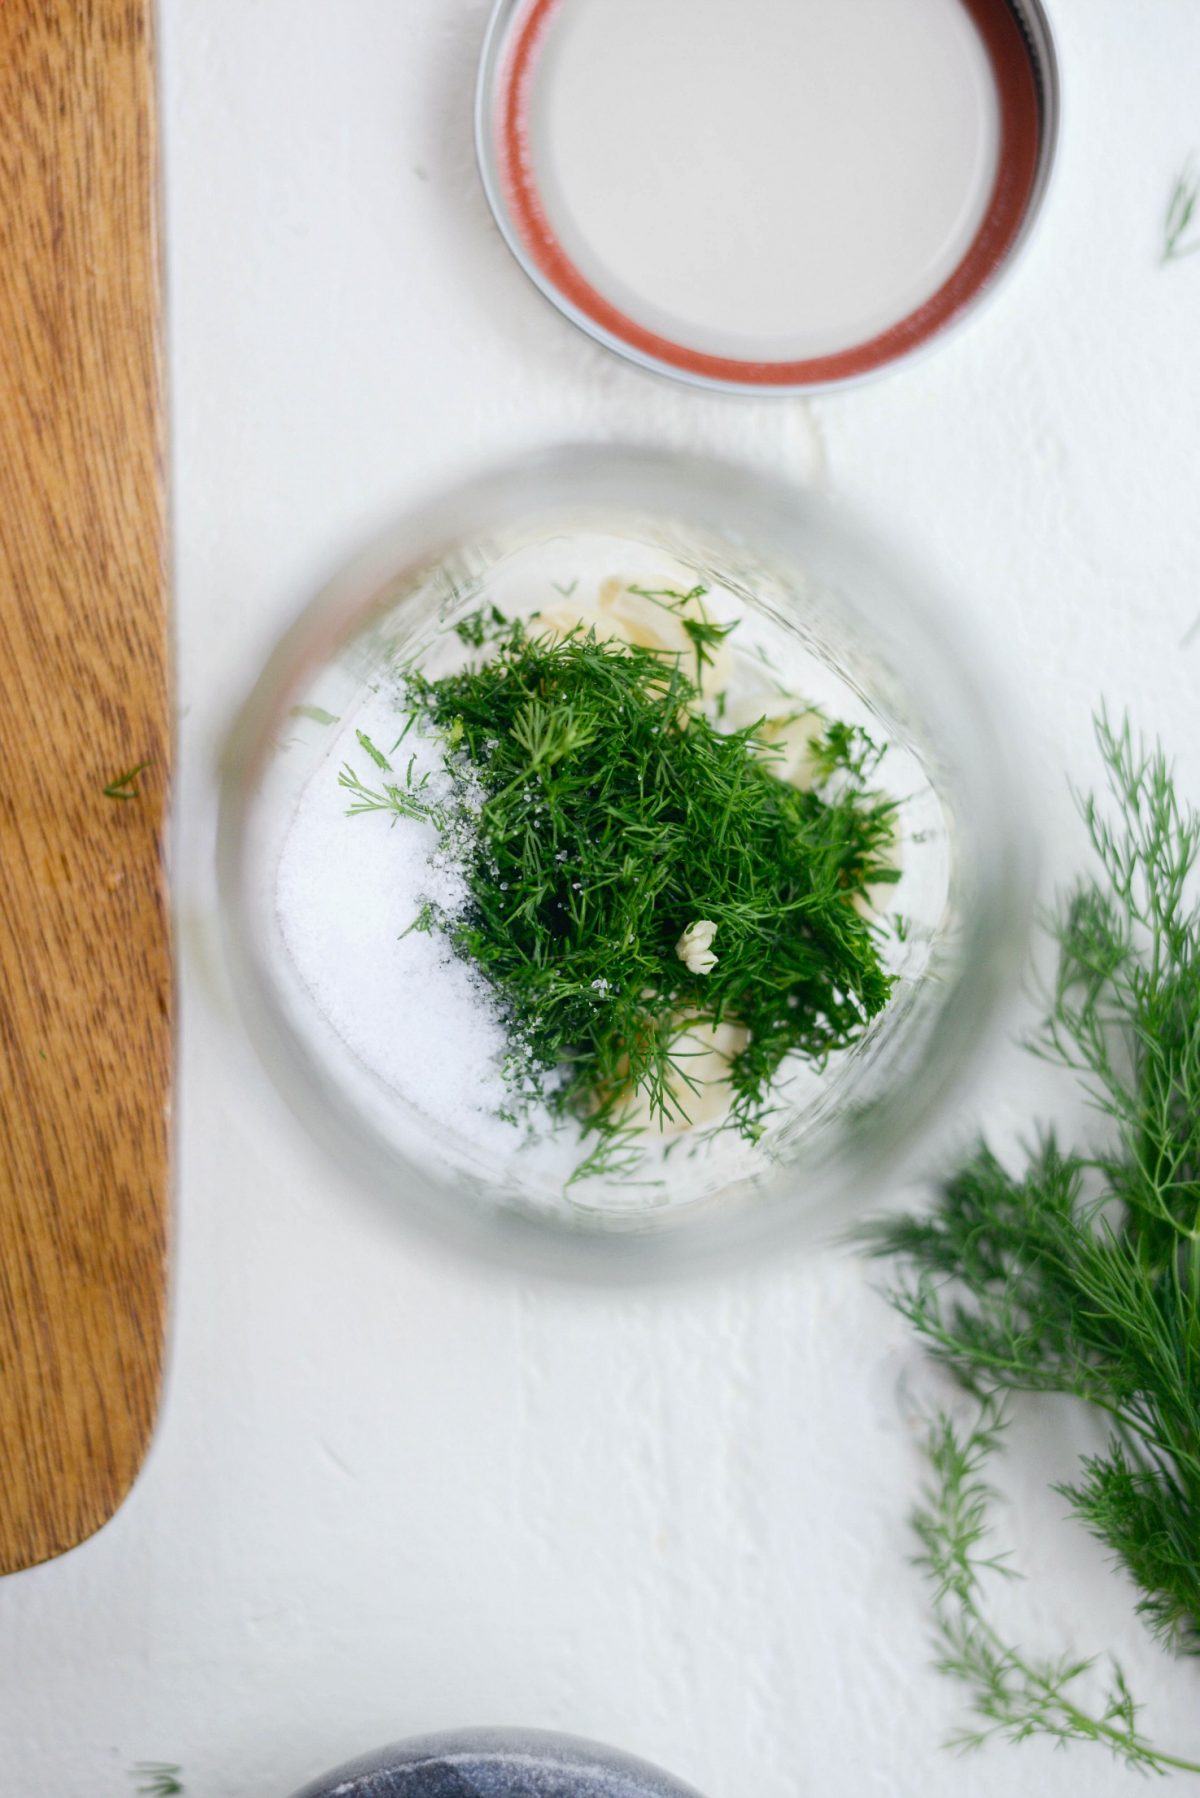 dill and salt in jar